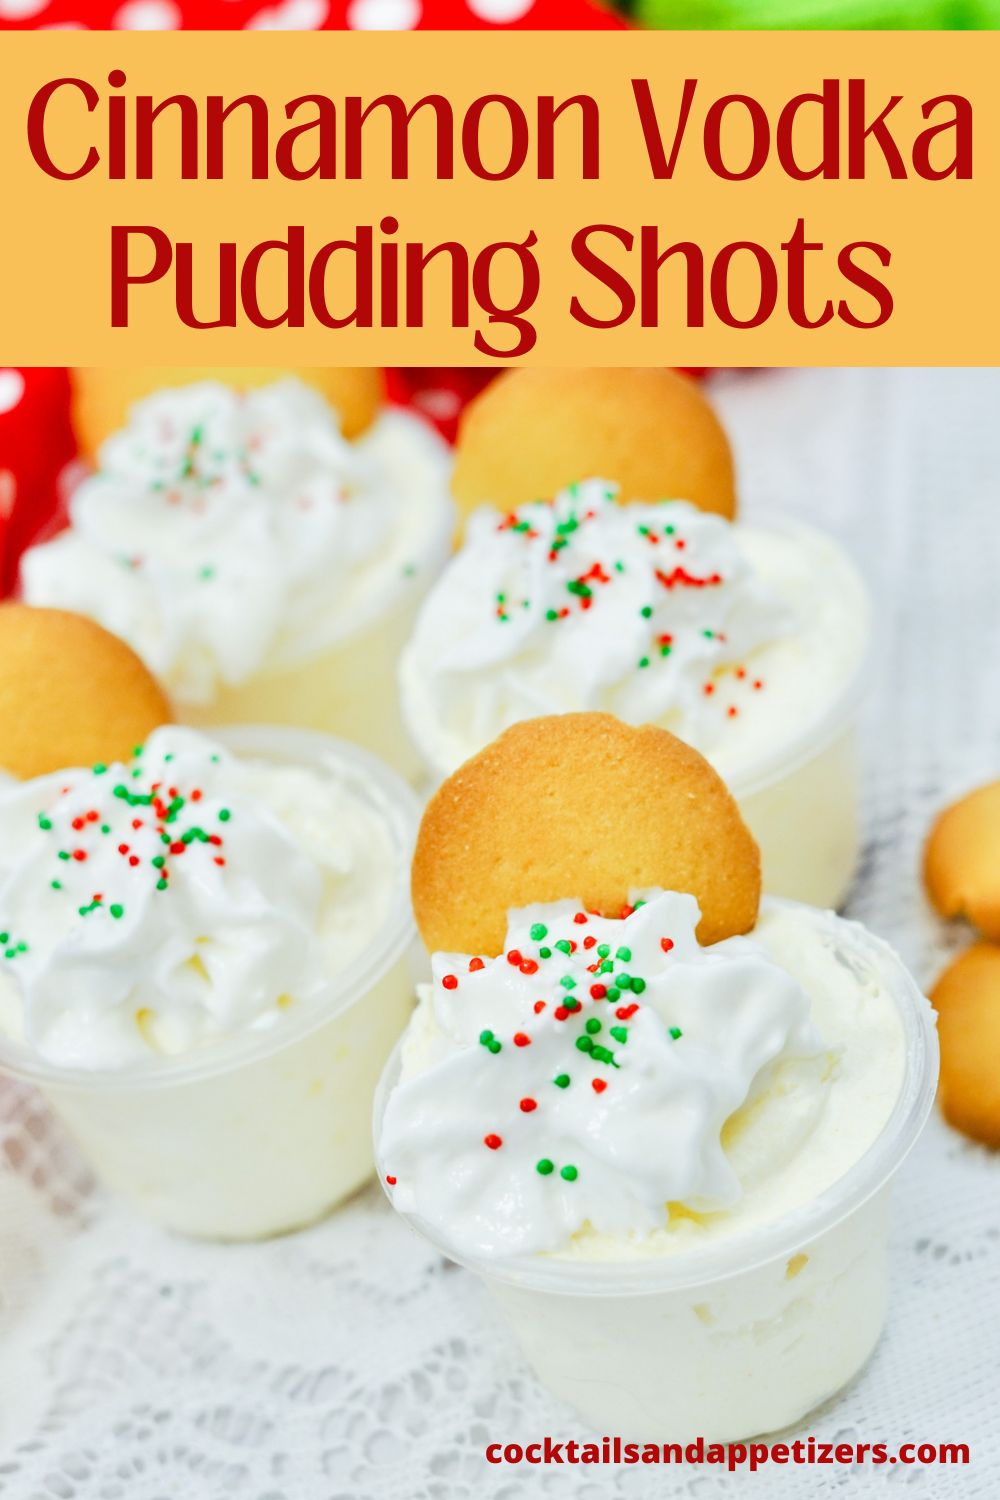 Cinnamon vodka pudding shots with a sugar cookie garnish and sprinkles on a tray.